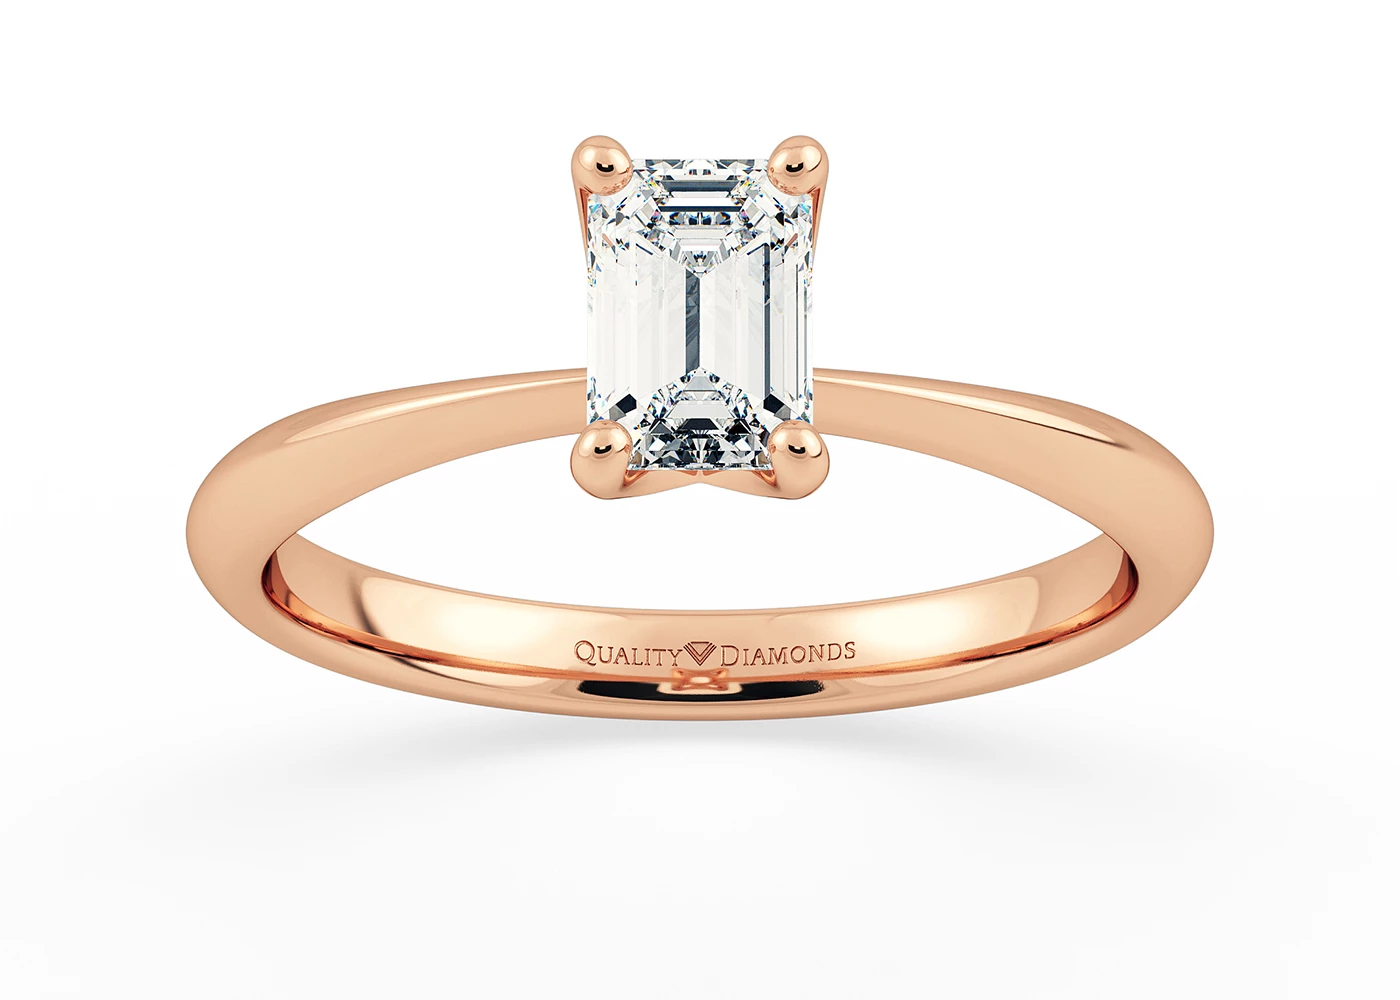 Two Carat Lab Grown Emerald Solitaire Diamond Engagement Ring in 18K Rose Gold